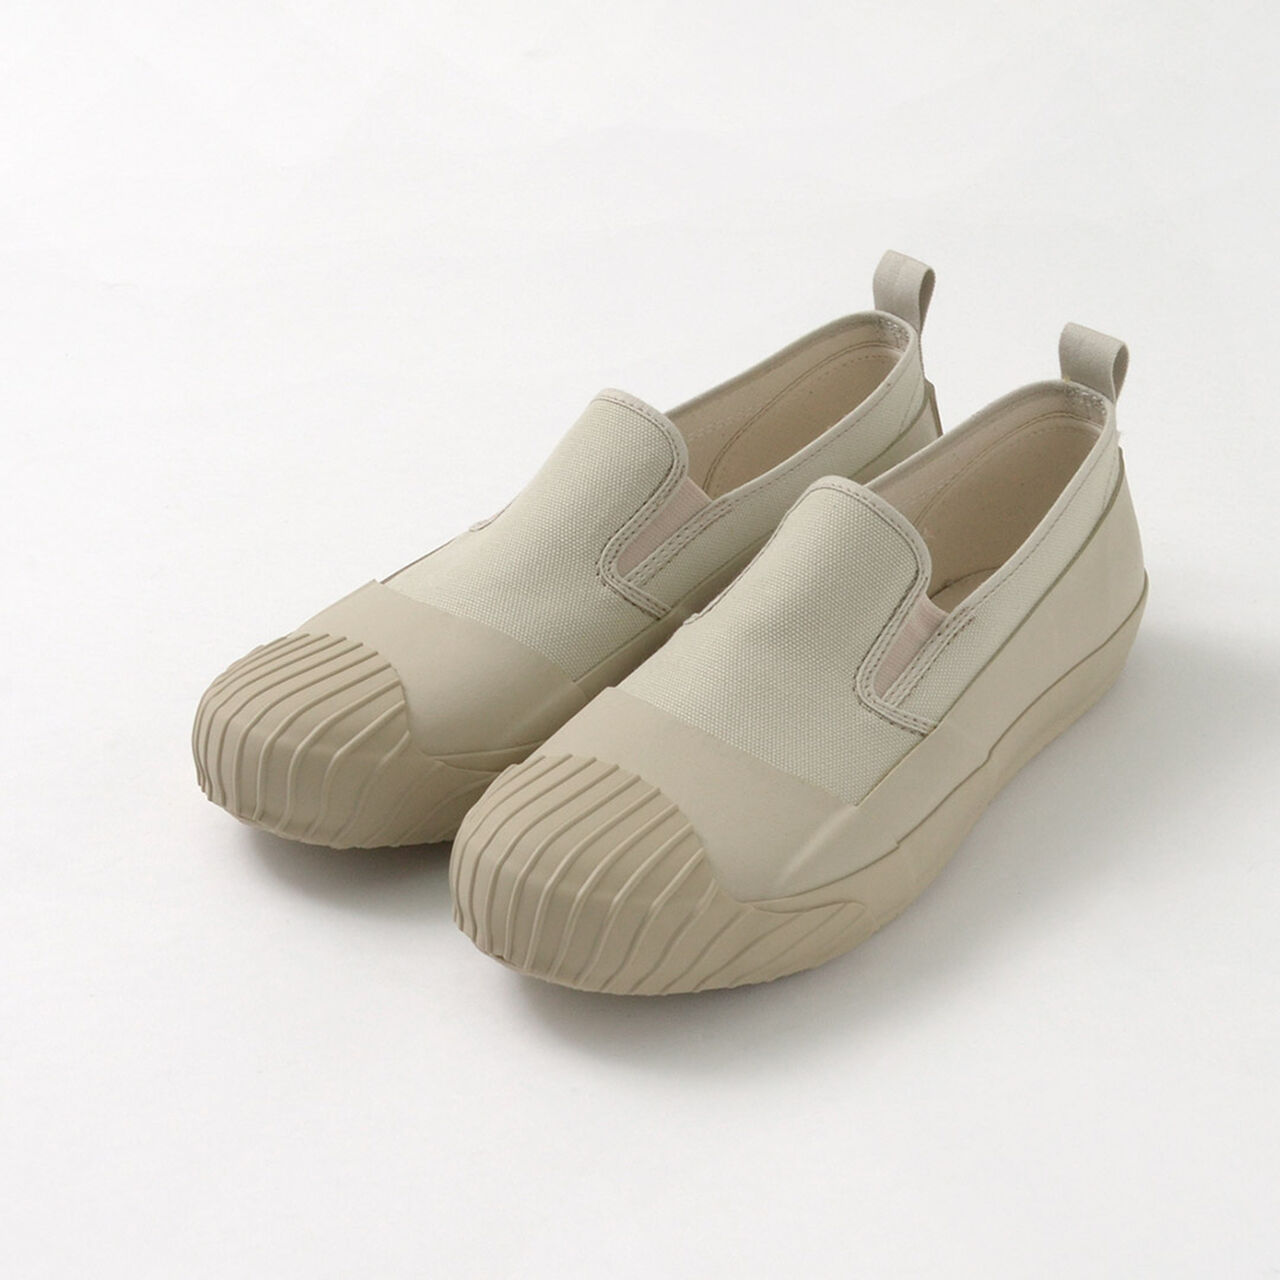 All Weather Slip-On Sneakers,Beige, large image number 0